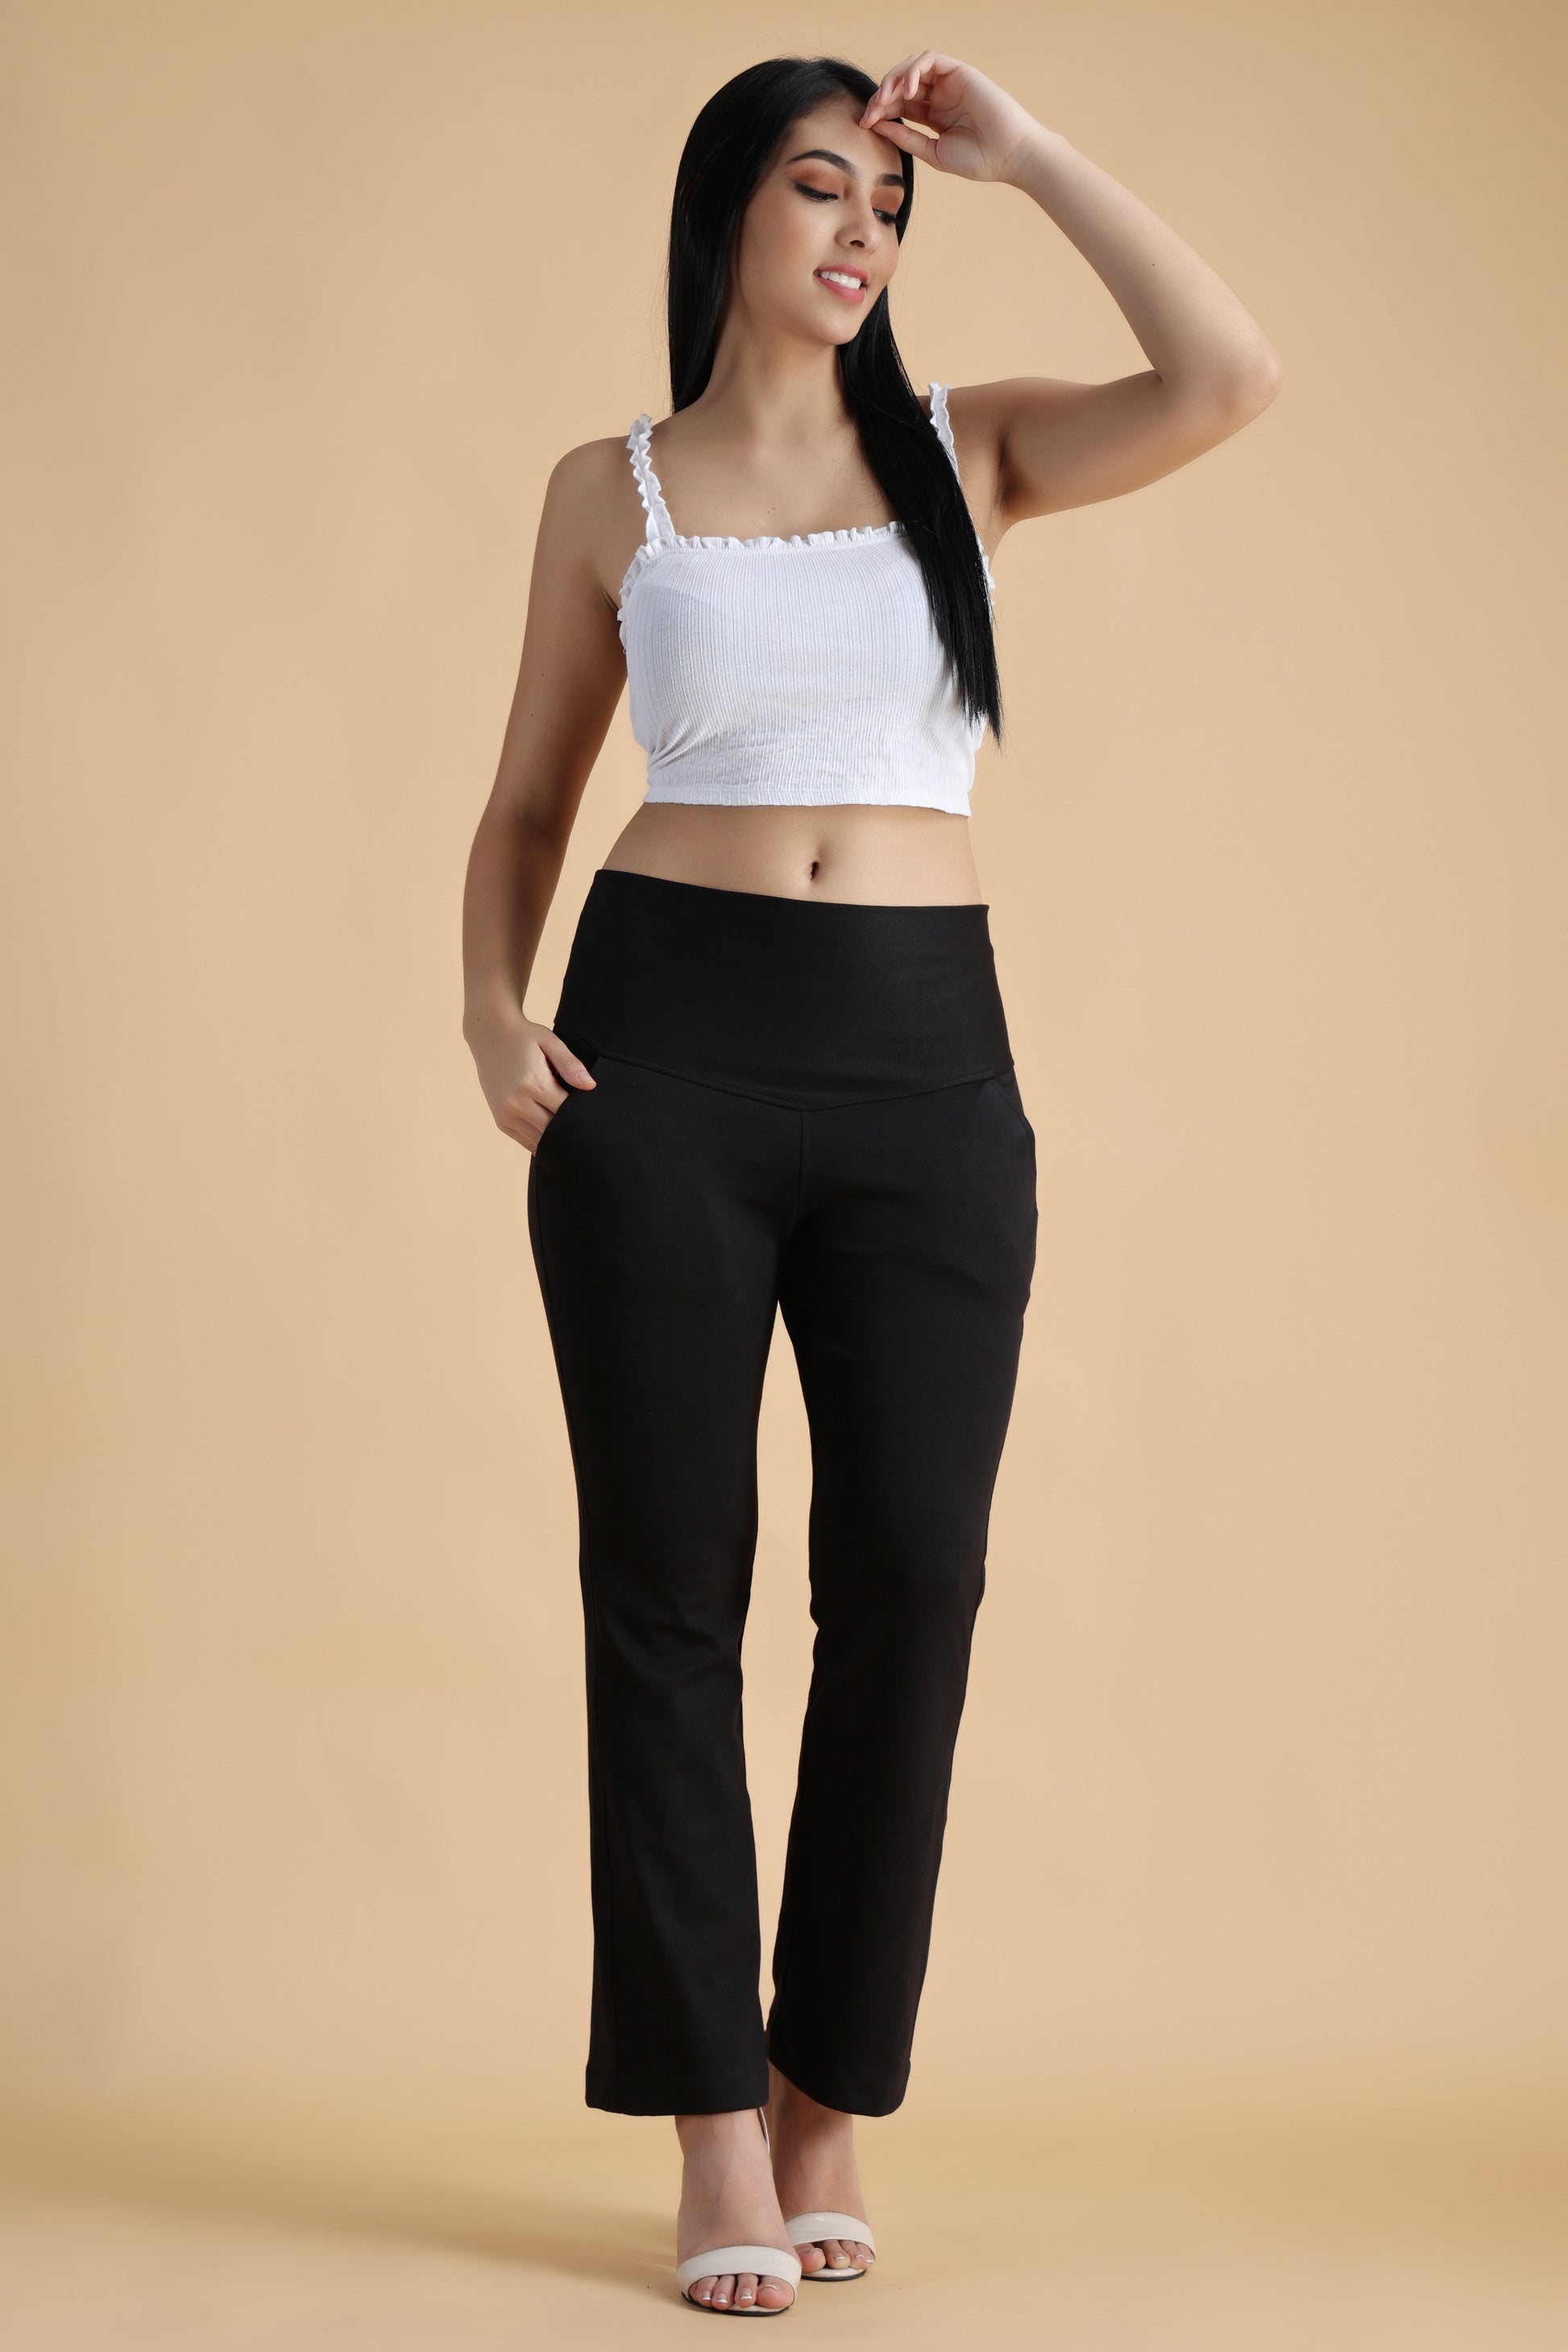 Tummy Tuck Jeans 3 - Buy Tummy Tuck Jeans 3 online in India